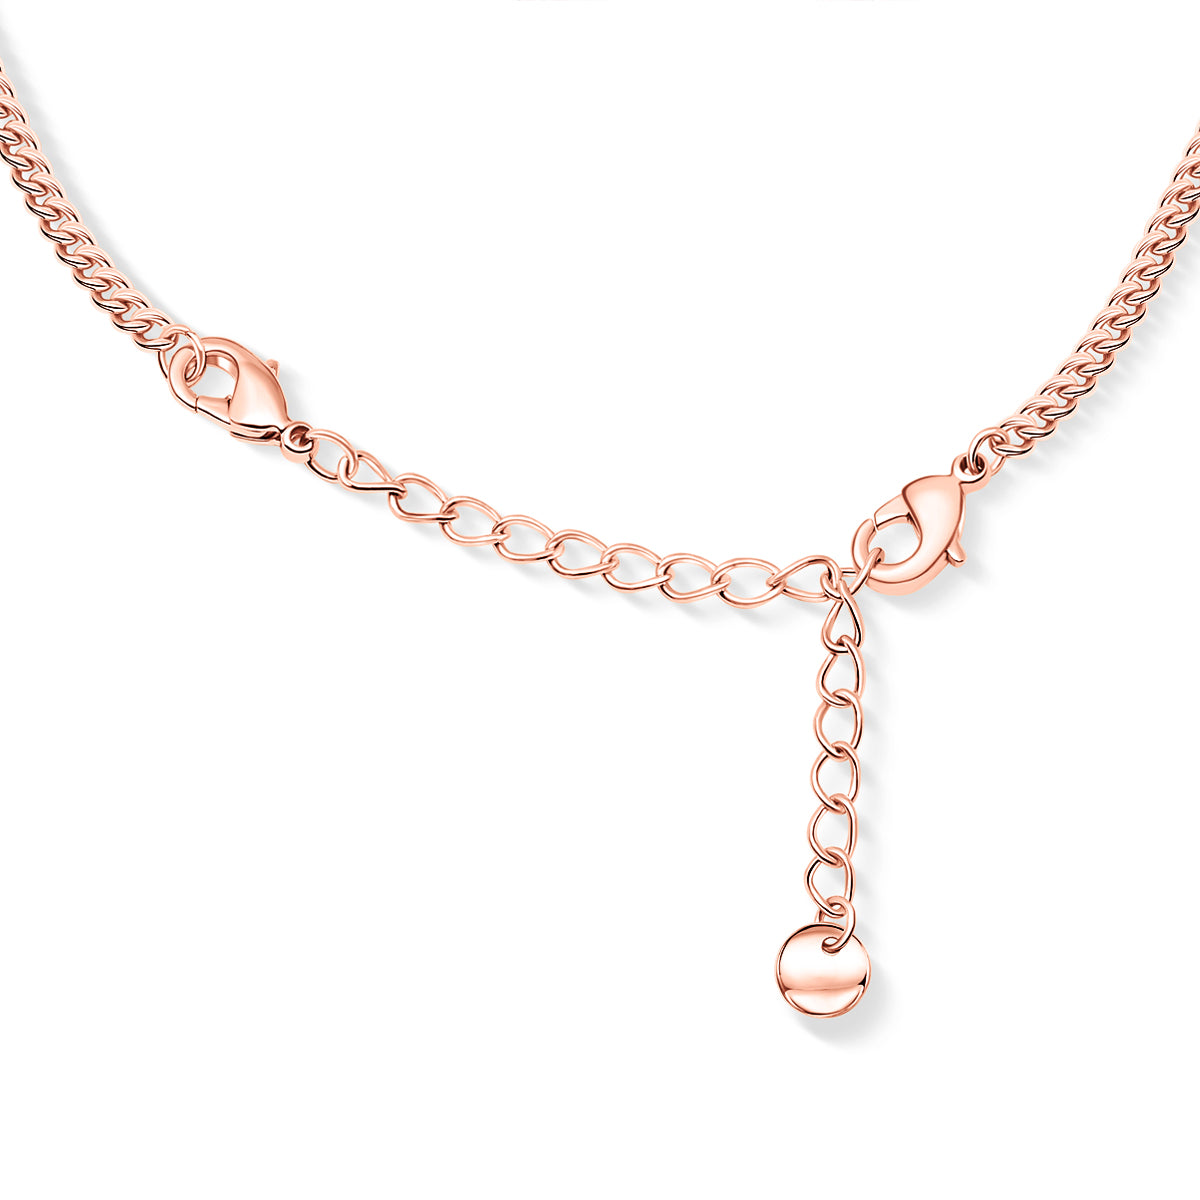 Rose gold necklace clasp